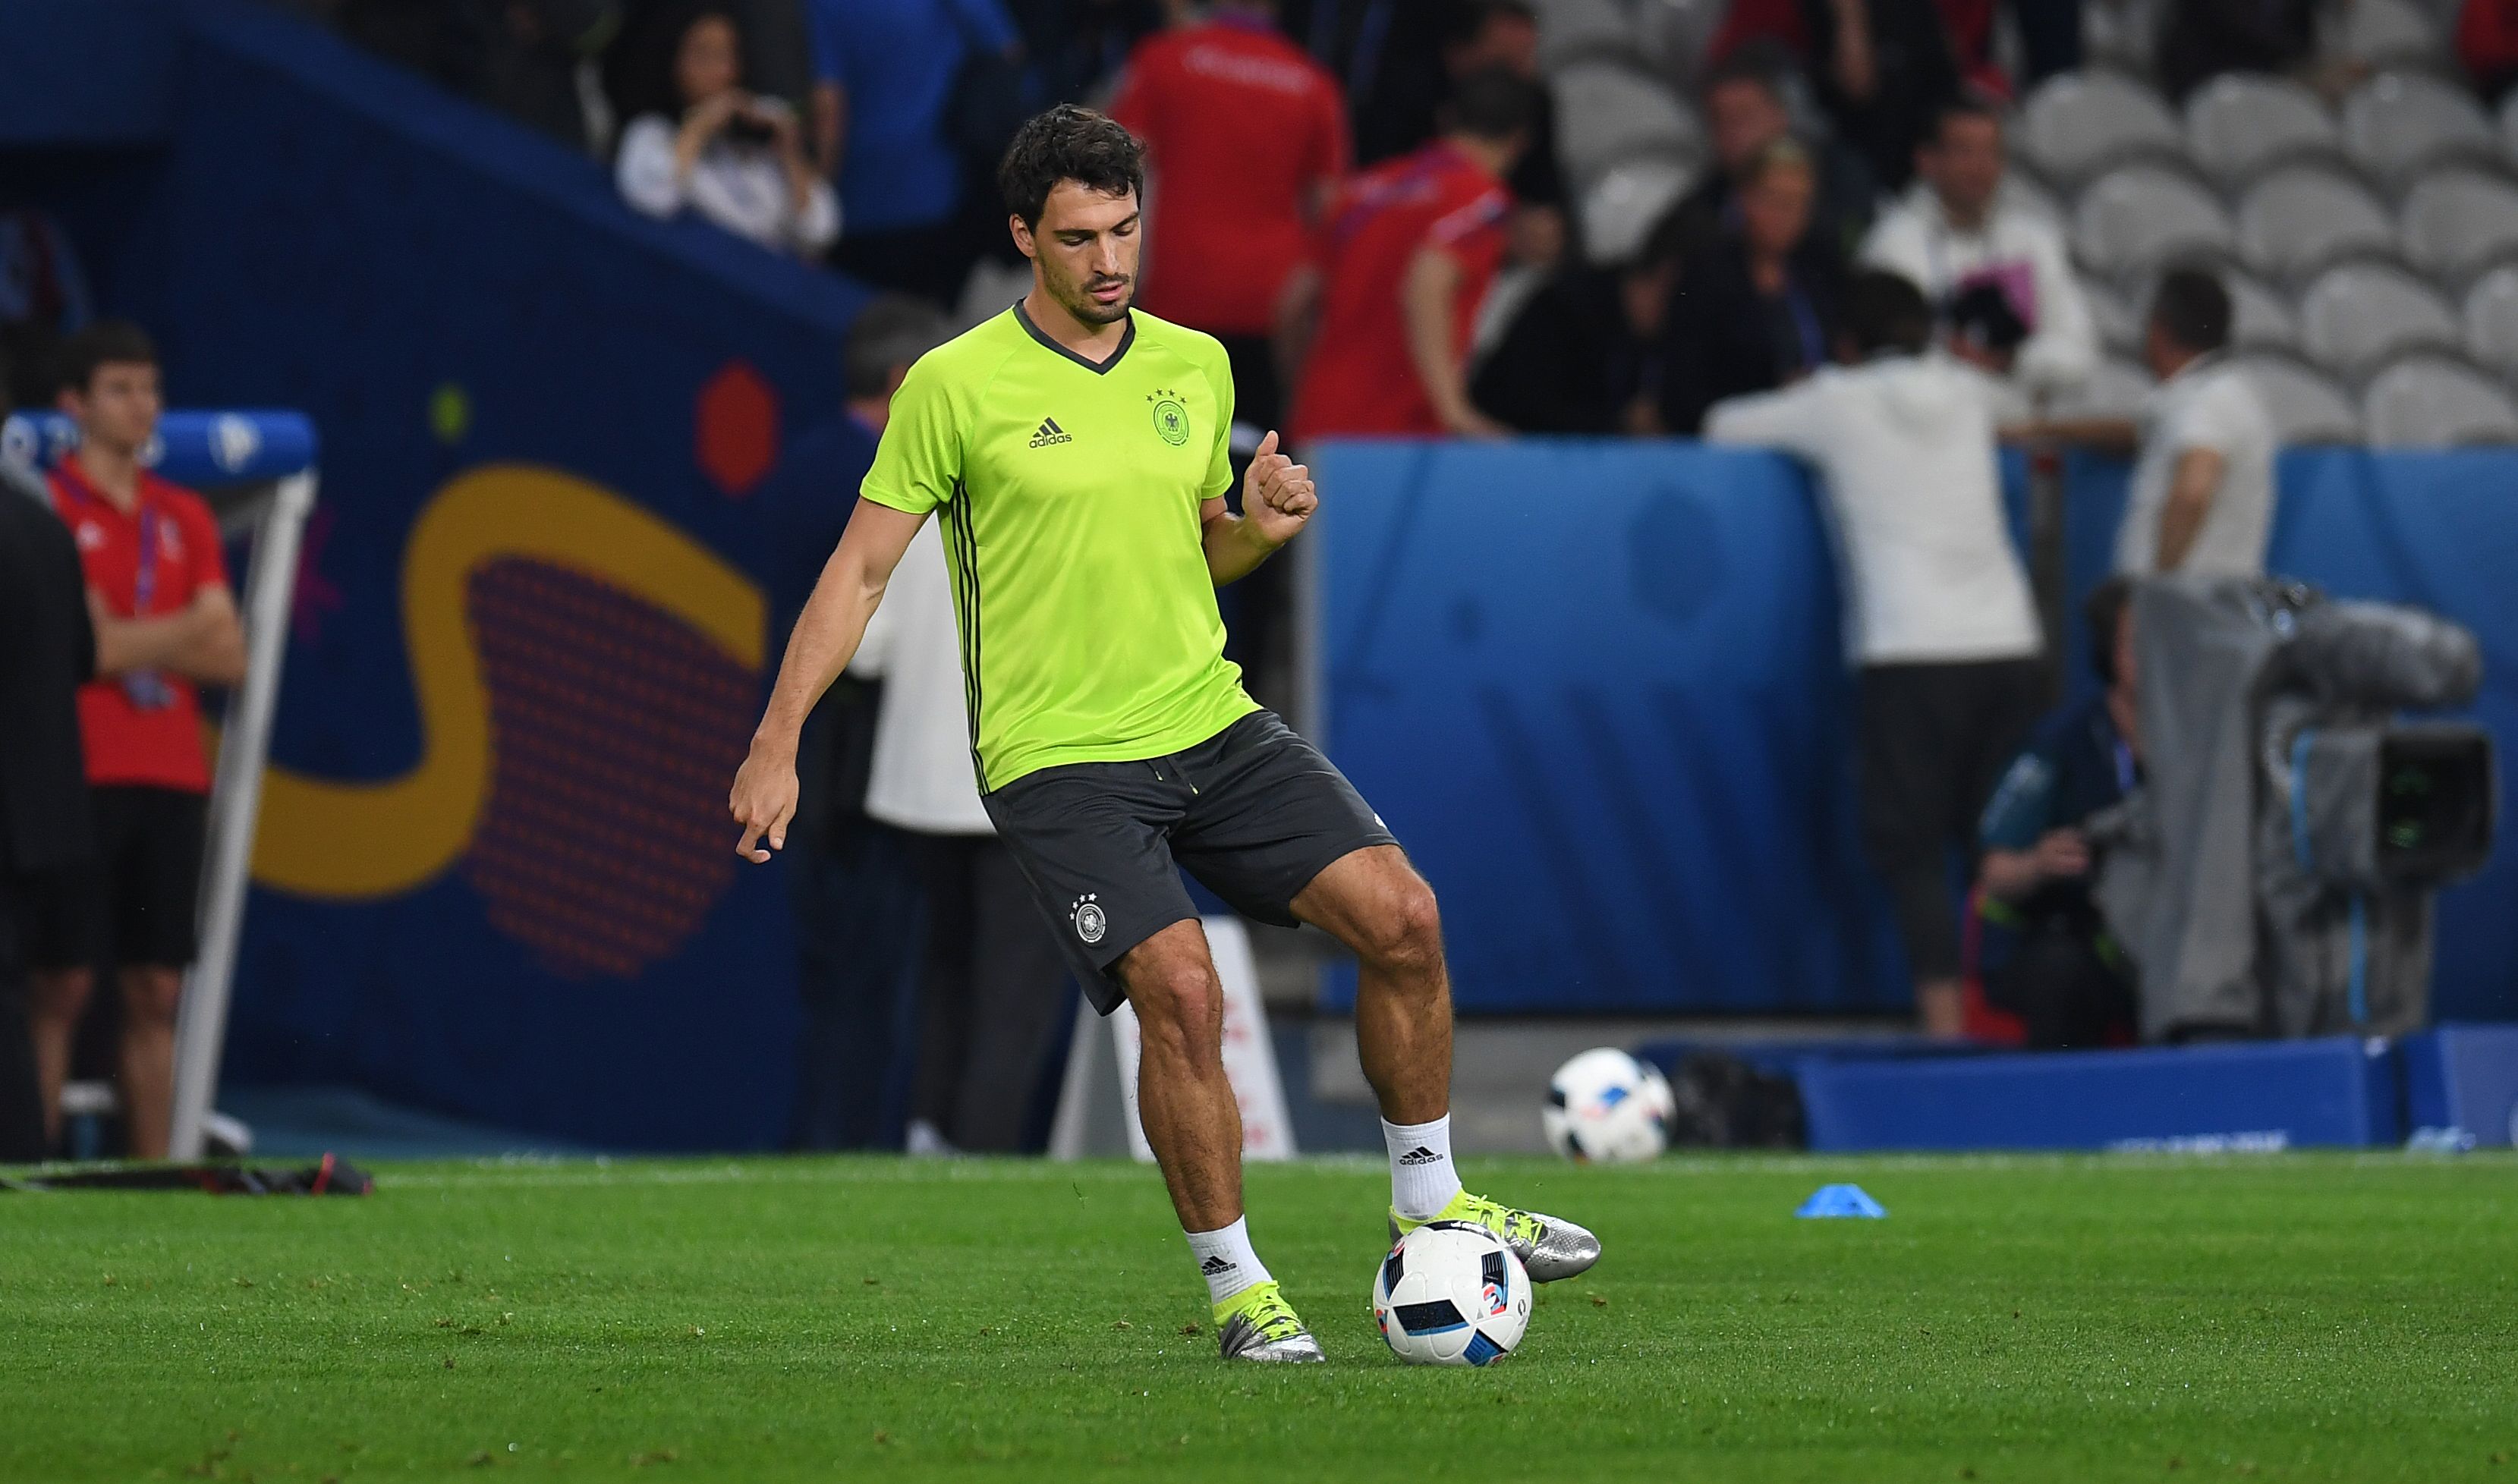 Germany's defender Mats Hummels attends a training session at the stadium Pierre Mauroy in Lille, northern France, on June 11, 2016, on the eve of the Euro 2016 football match between Germany and Ukraine. / AFP / PATRIK STOLLARZ        (Photo credit should read PATRIK STOLLARZ/AFP/Getty Images)